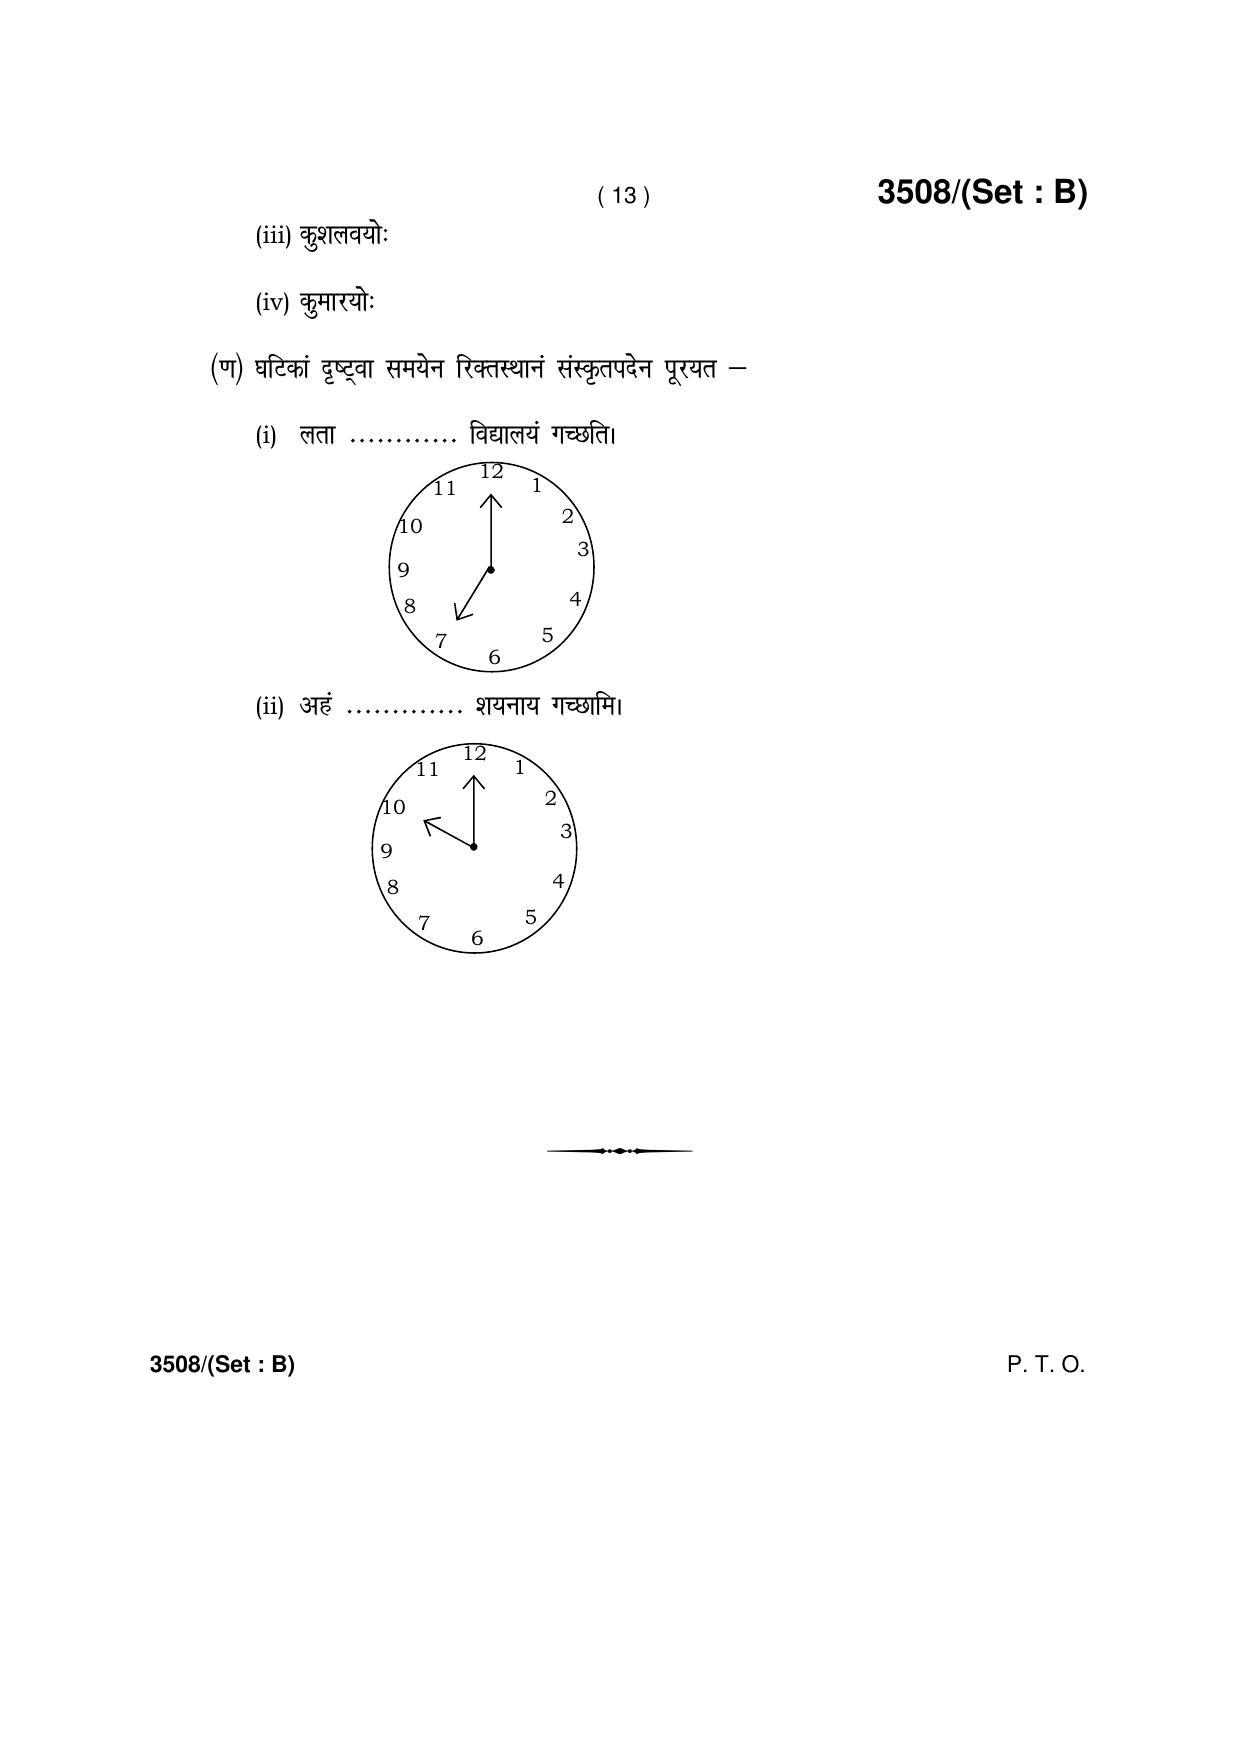 Haryana Board HBSE Class 10 Sanskrit -B 2018 Question Paper - Page 13